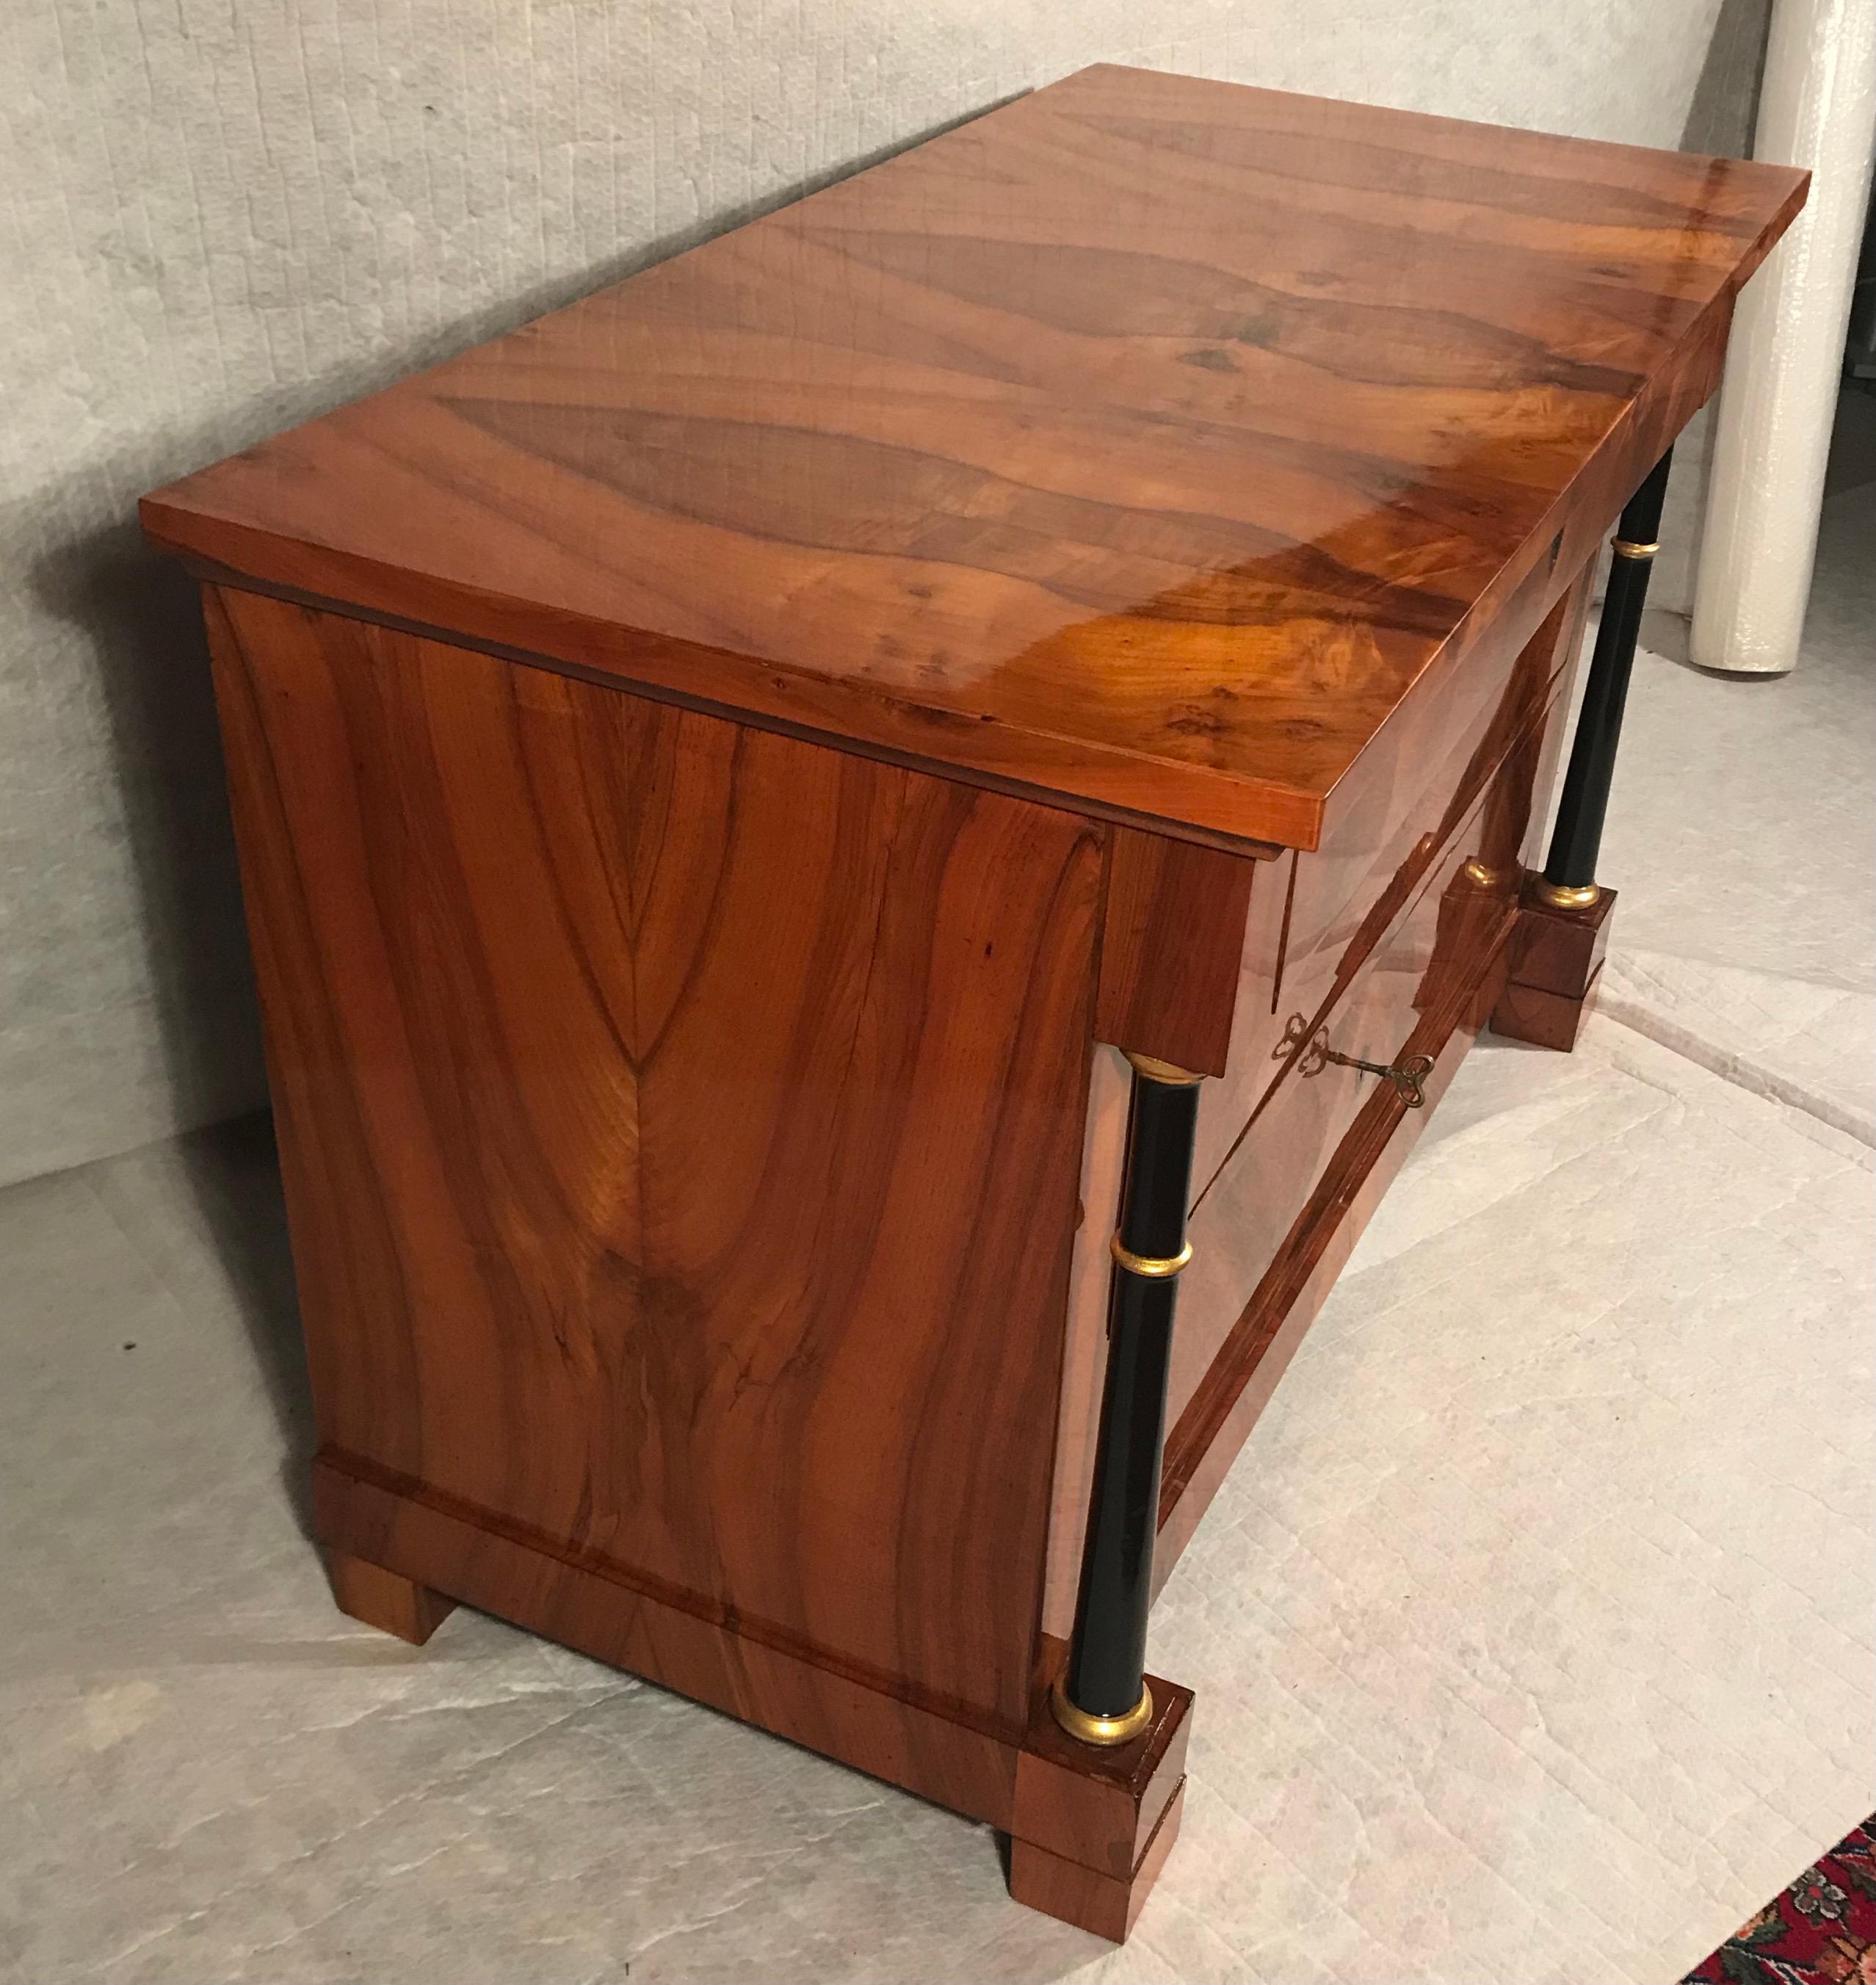 Biedermeier Chest of Drawers, South German 1820, walnut In Good Condition For Sale In Belmont, MA